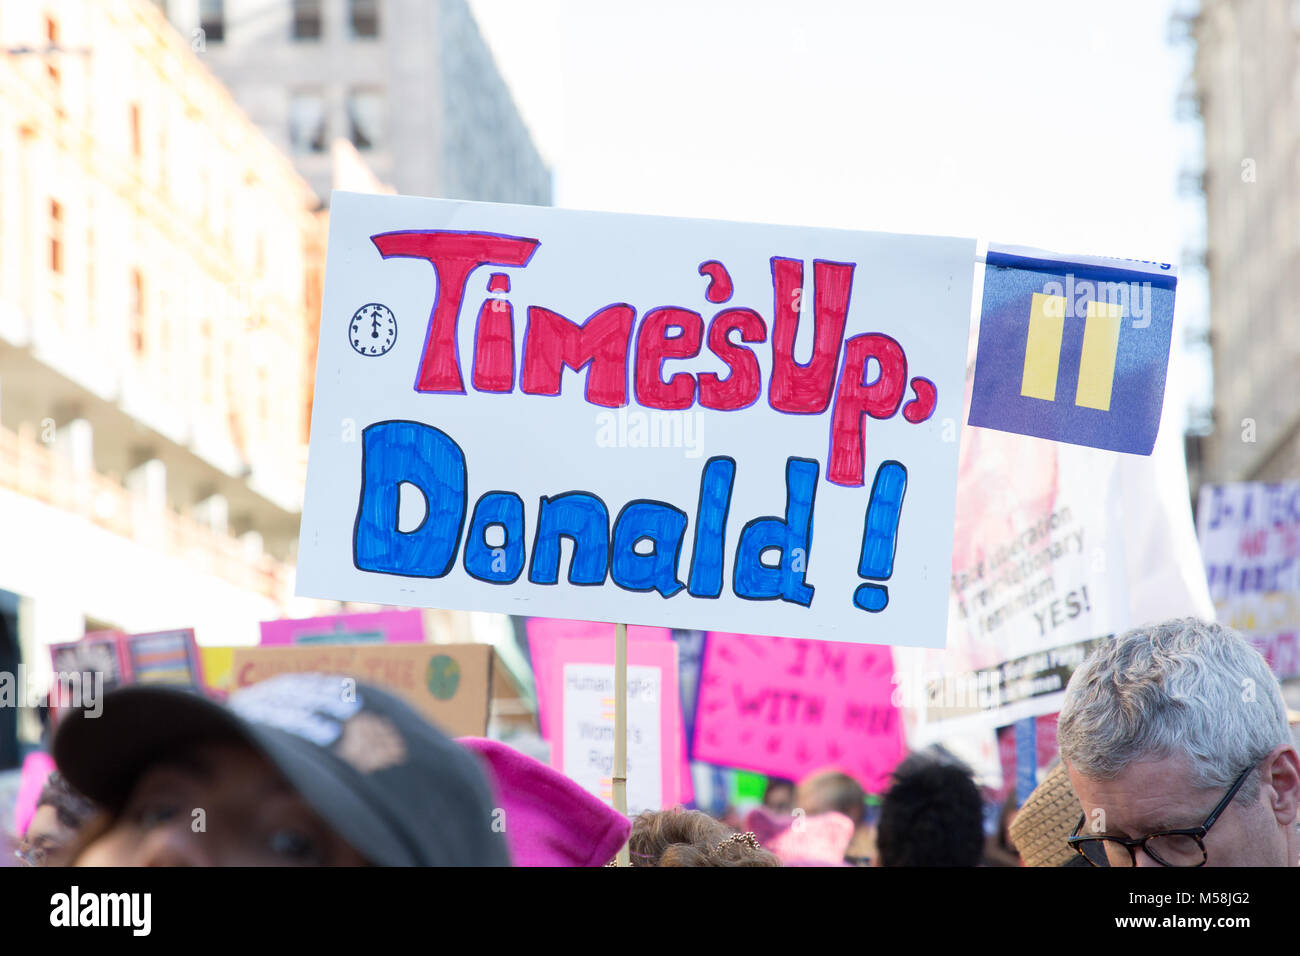 The Women's March in Los Angeles as similar marches were being staged across the United States on the first anniversary of President Donald Trump's inauguration.  Featuring: Atmosphere Where: Los Angeles, California, United States When: 20 Jan 2018 Credit: Sheri Determan/WENN.com Stock Photo